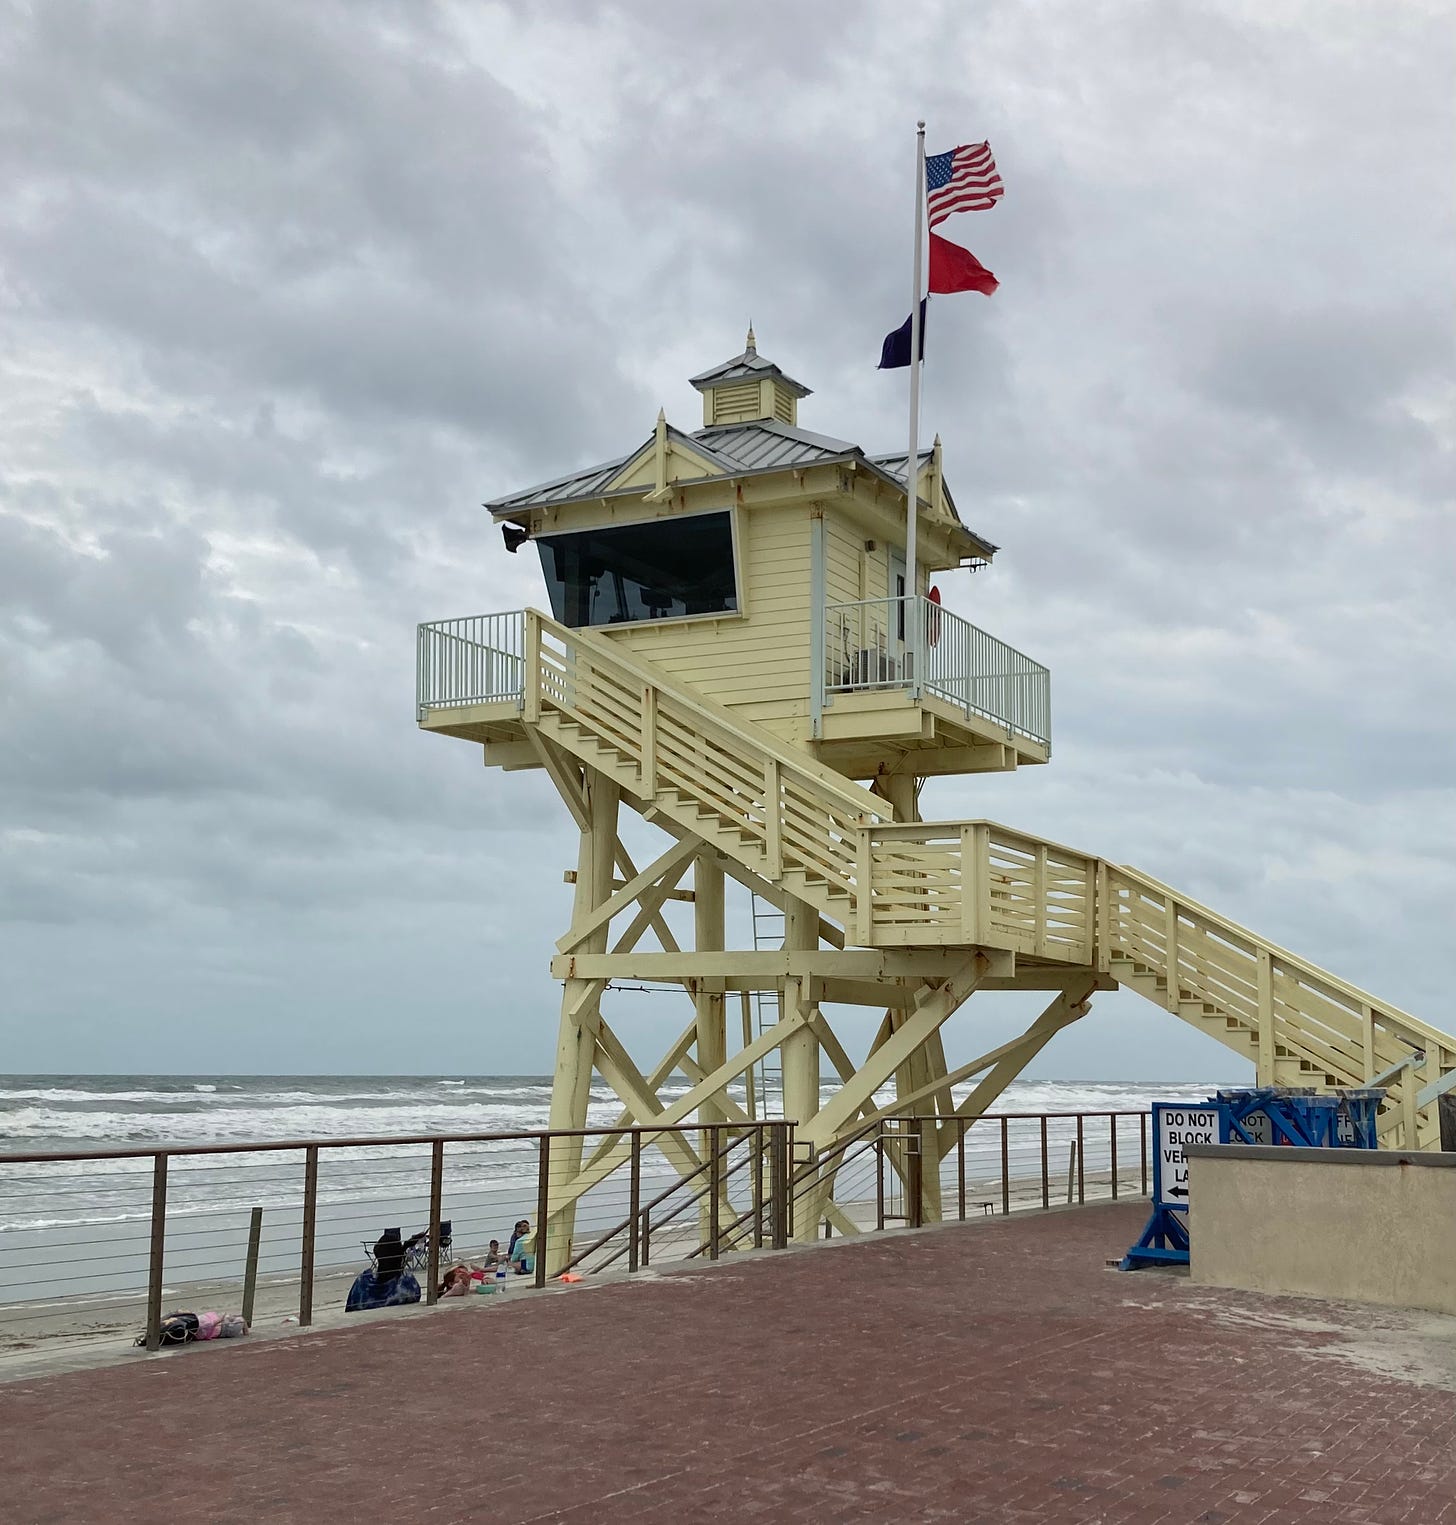 A very high, large, yellow life guard station overlooking an ocean with a rough surf. 